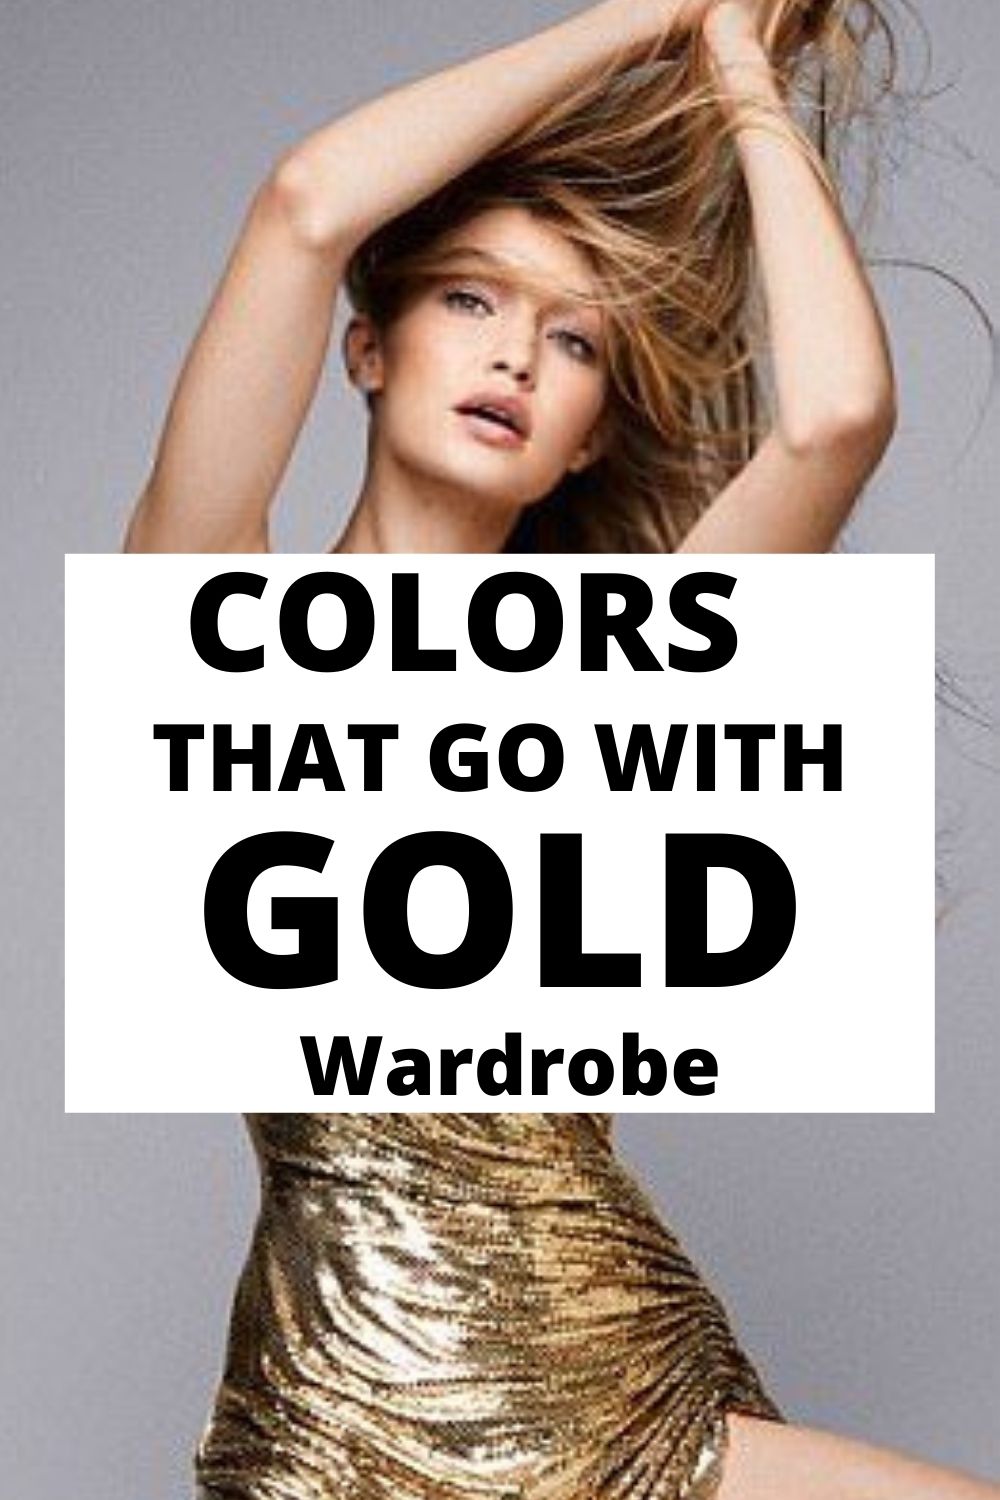 colors that go with gold